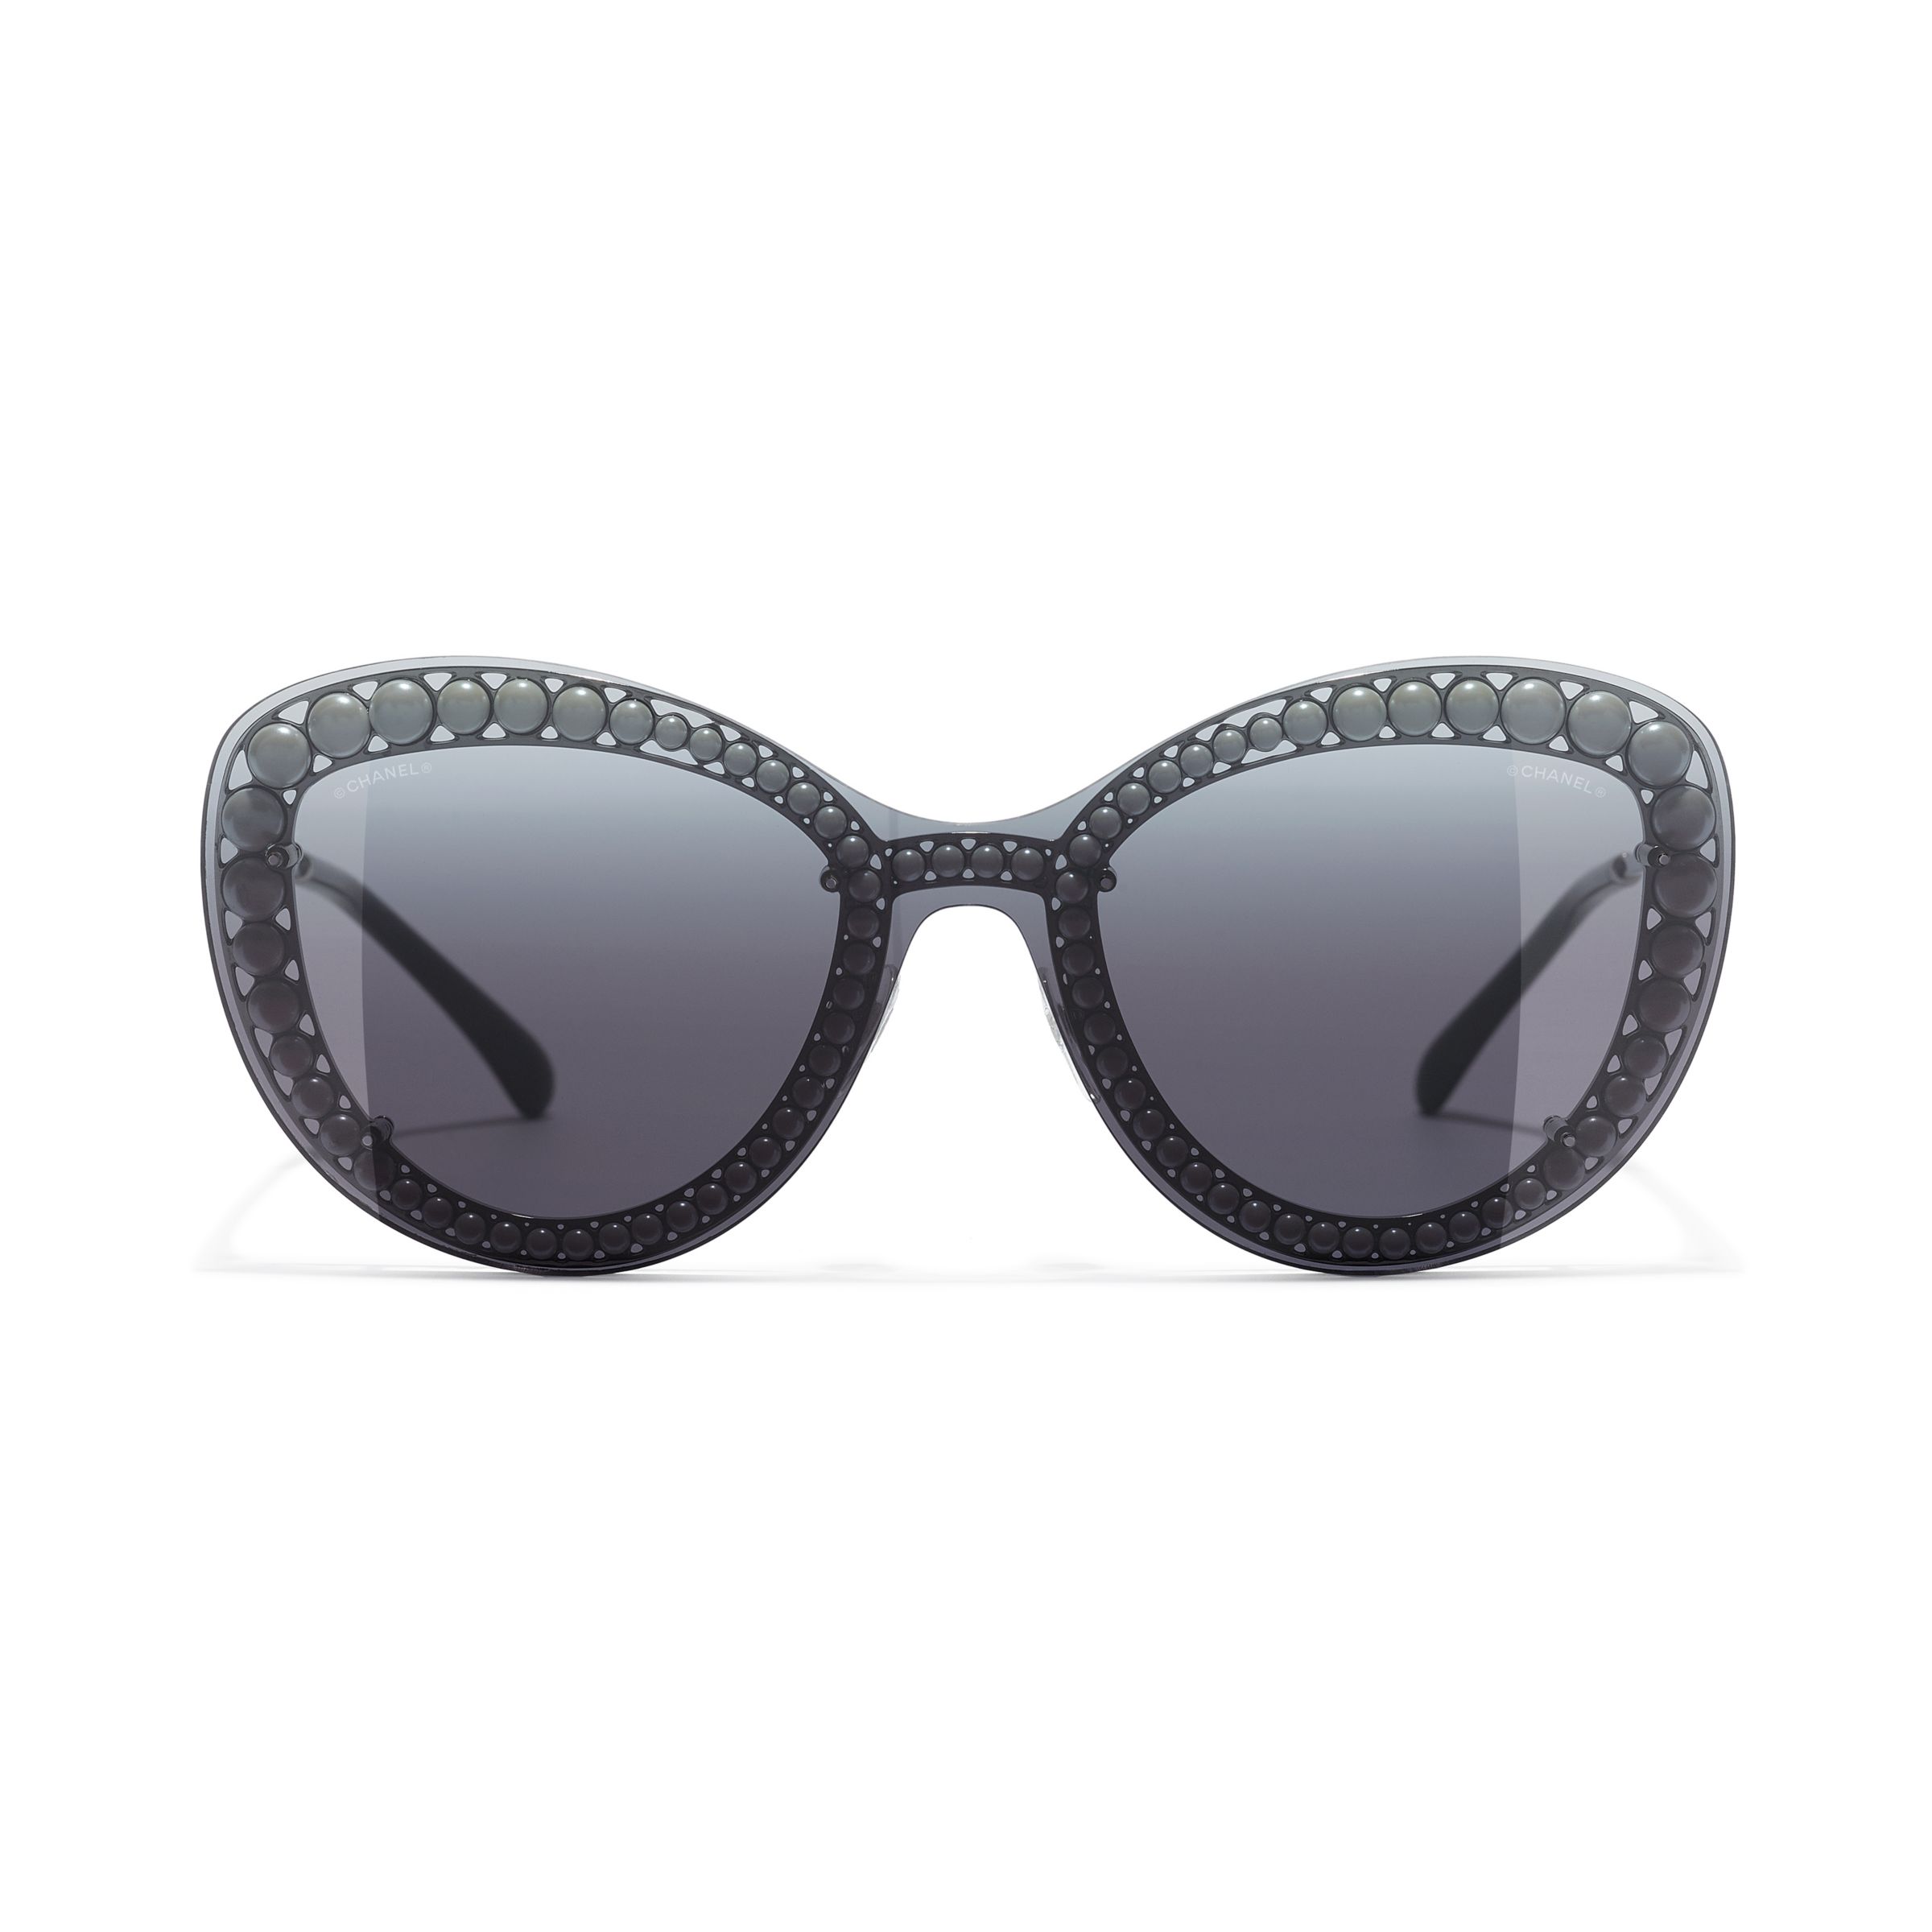 Buy CHANEL Butterfly Sunglasses CH4236 Gunmetal/Grey Gradient Online at johnlewis.com